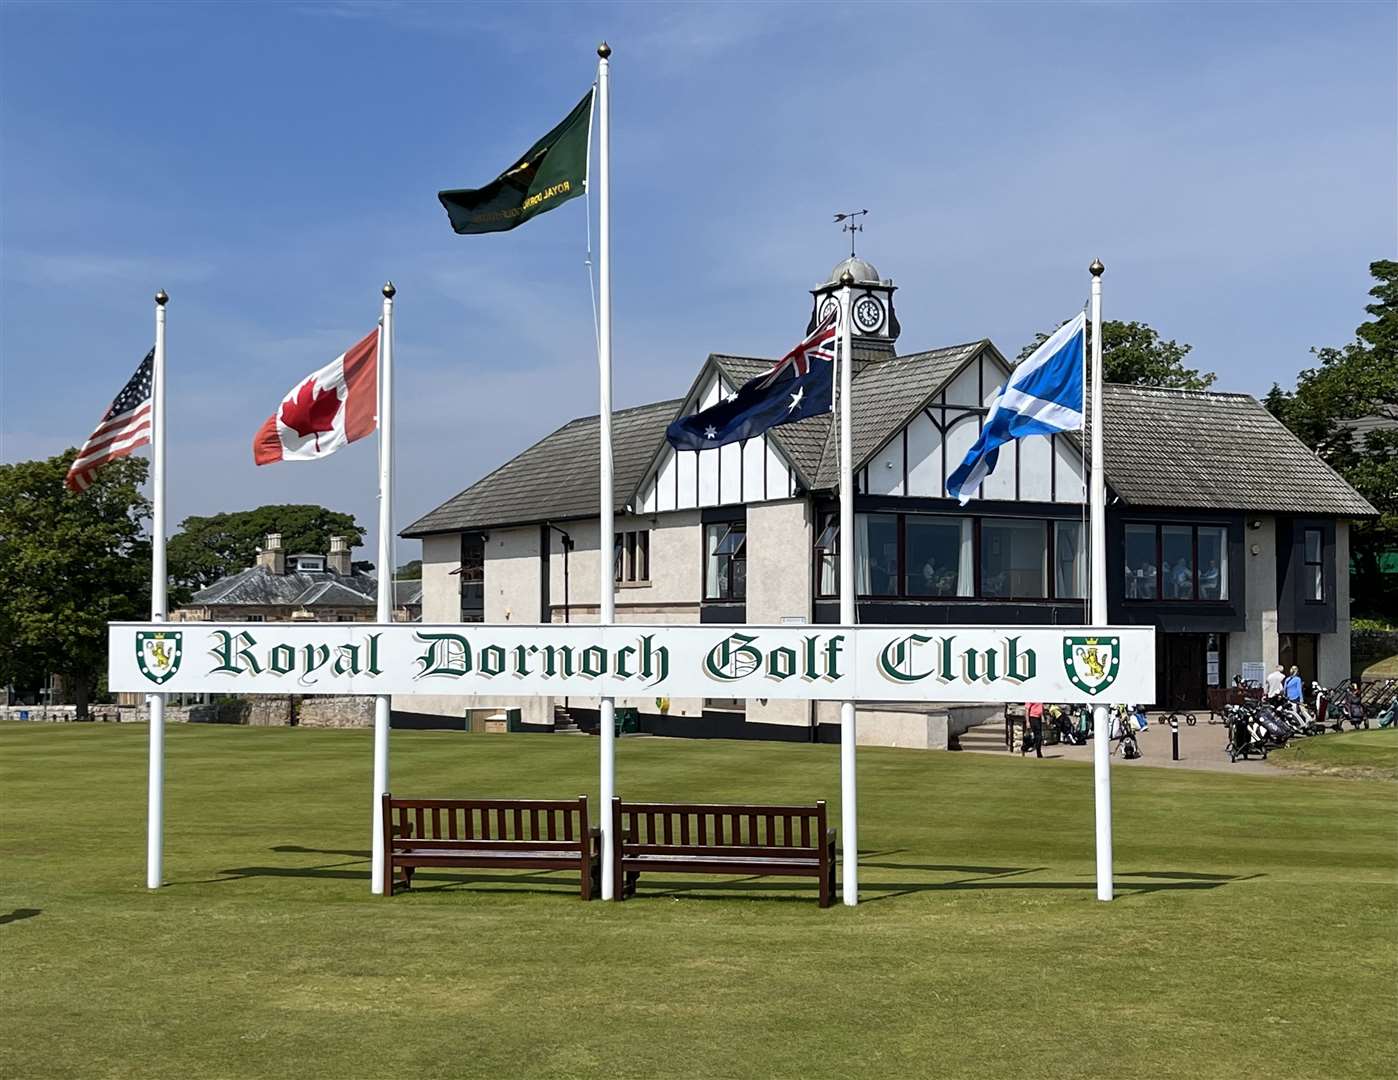 The competition takes place at Royal Dornoch on Friday and Saturday.